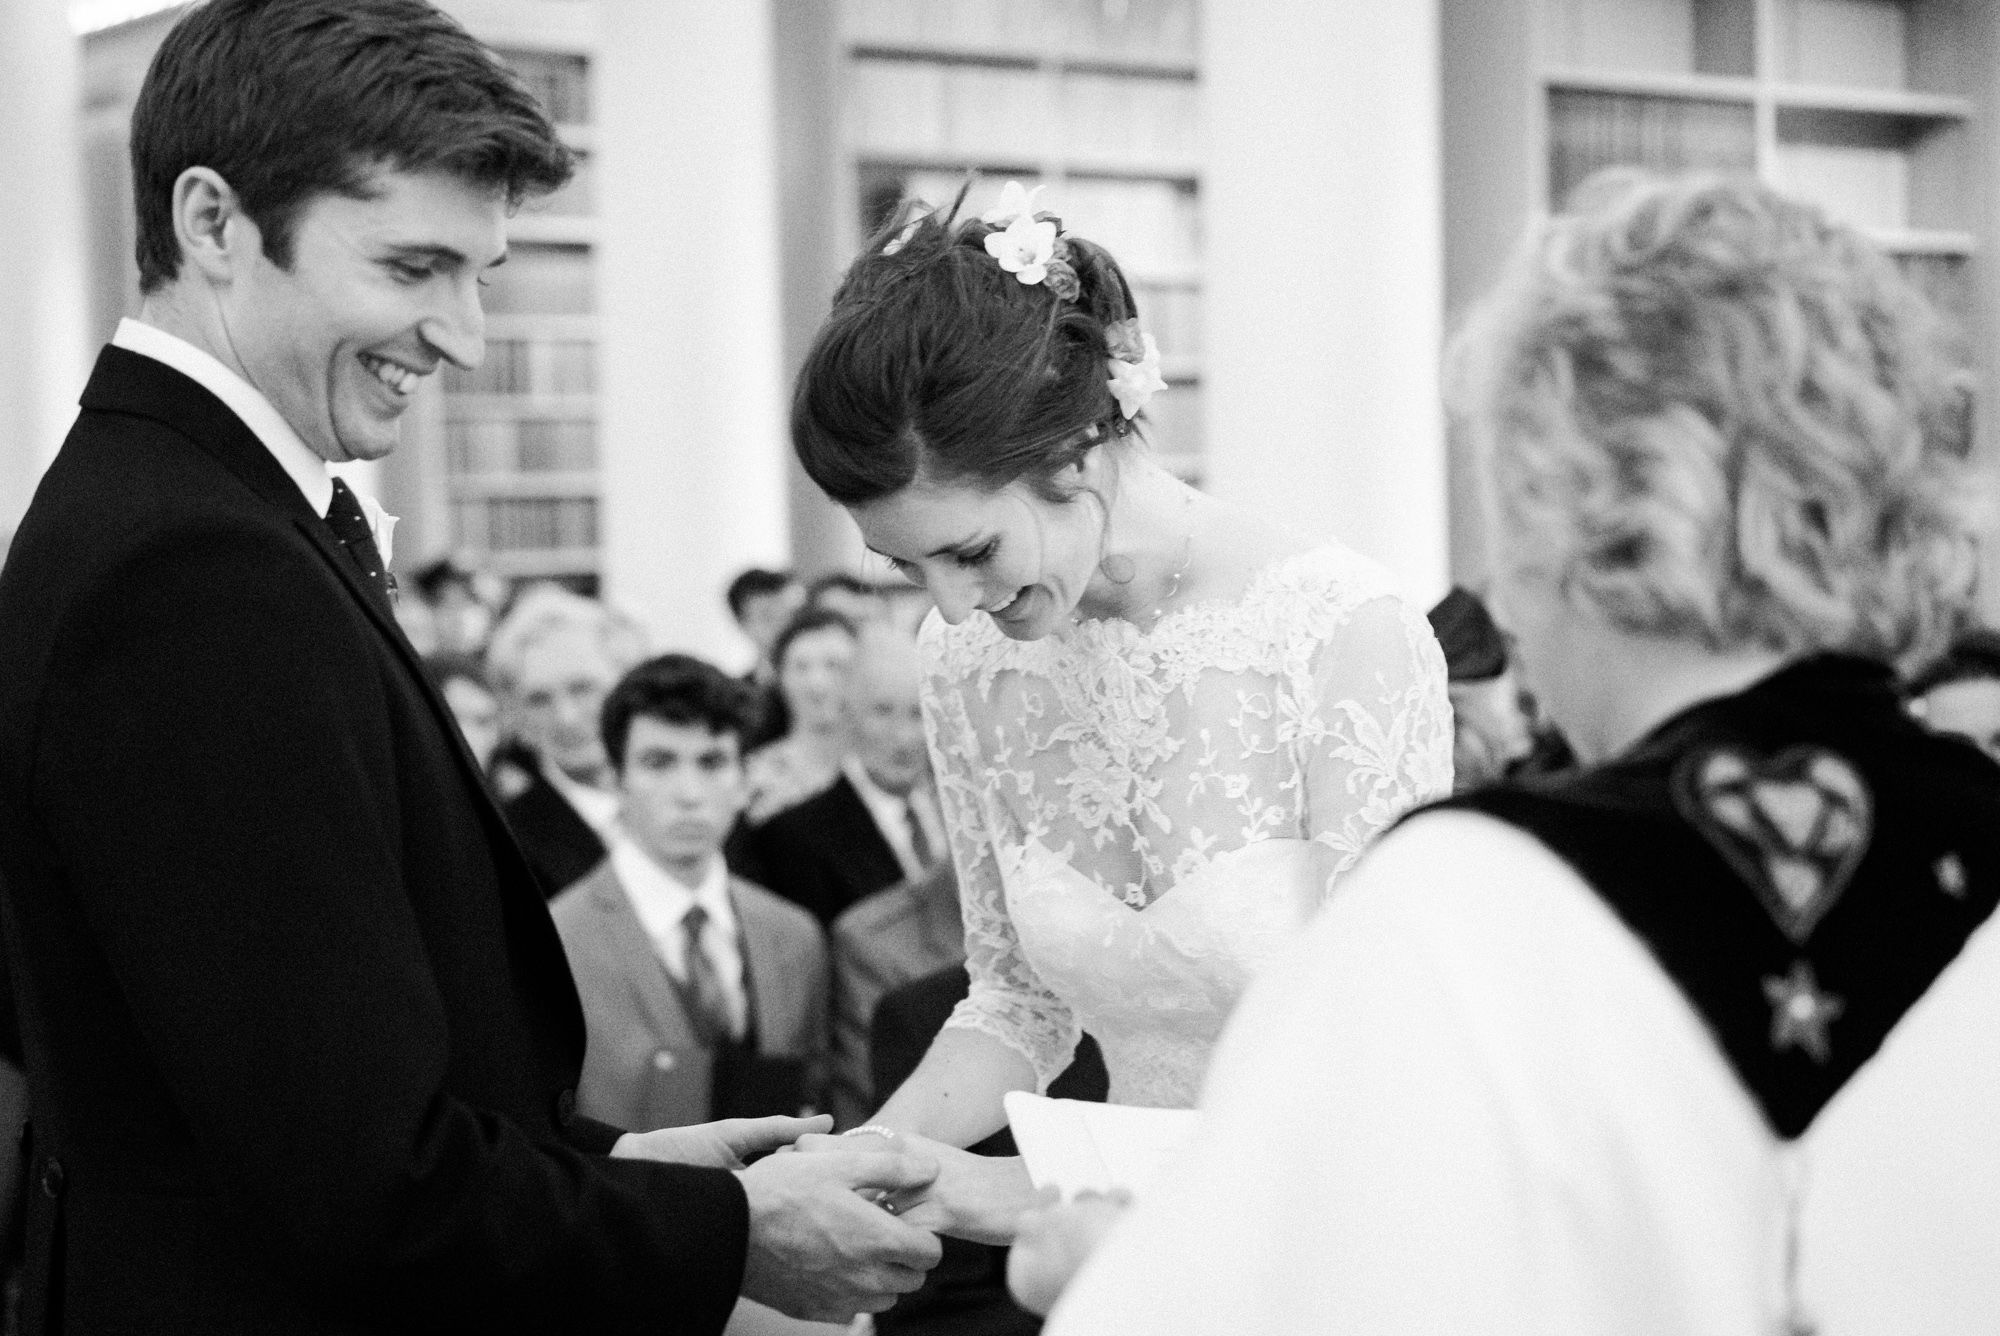 Wedding couple during ceremony at The Signet Library 